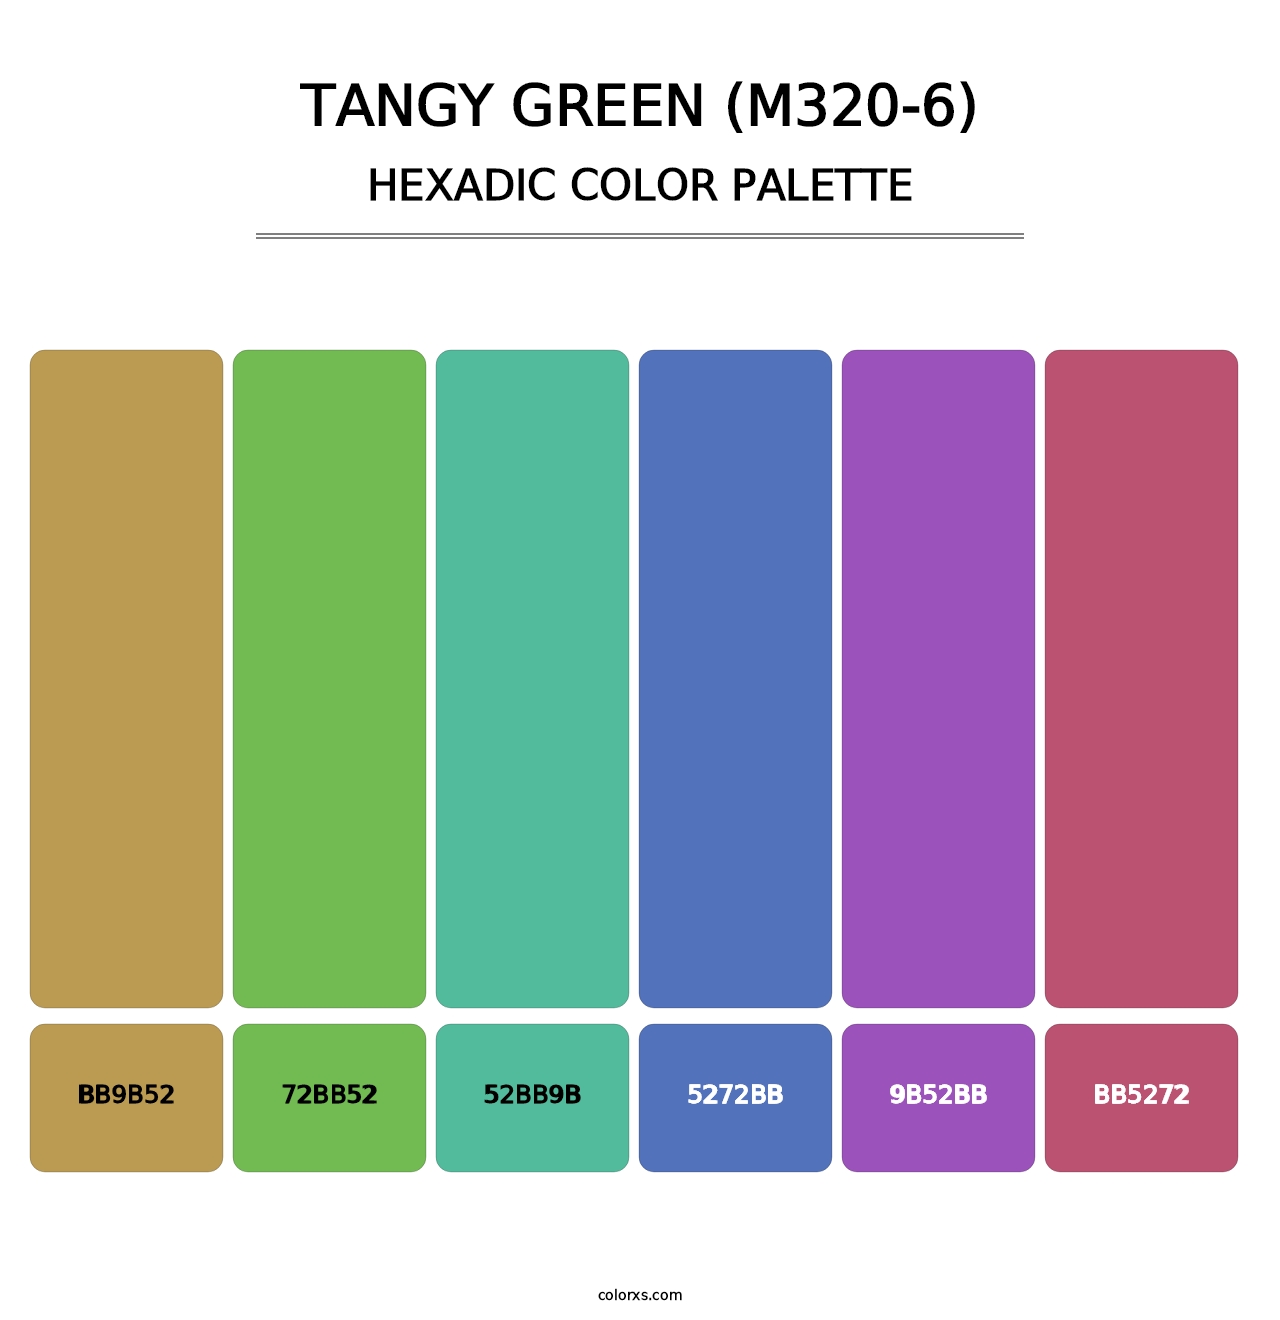 Tangy Green (M320-6) - Hexadic Color Palette